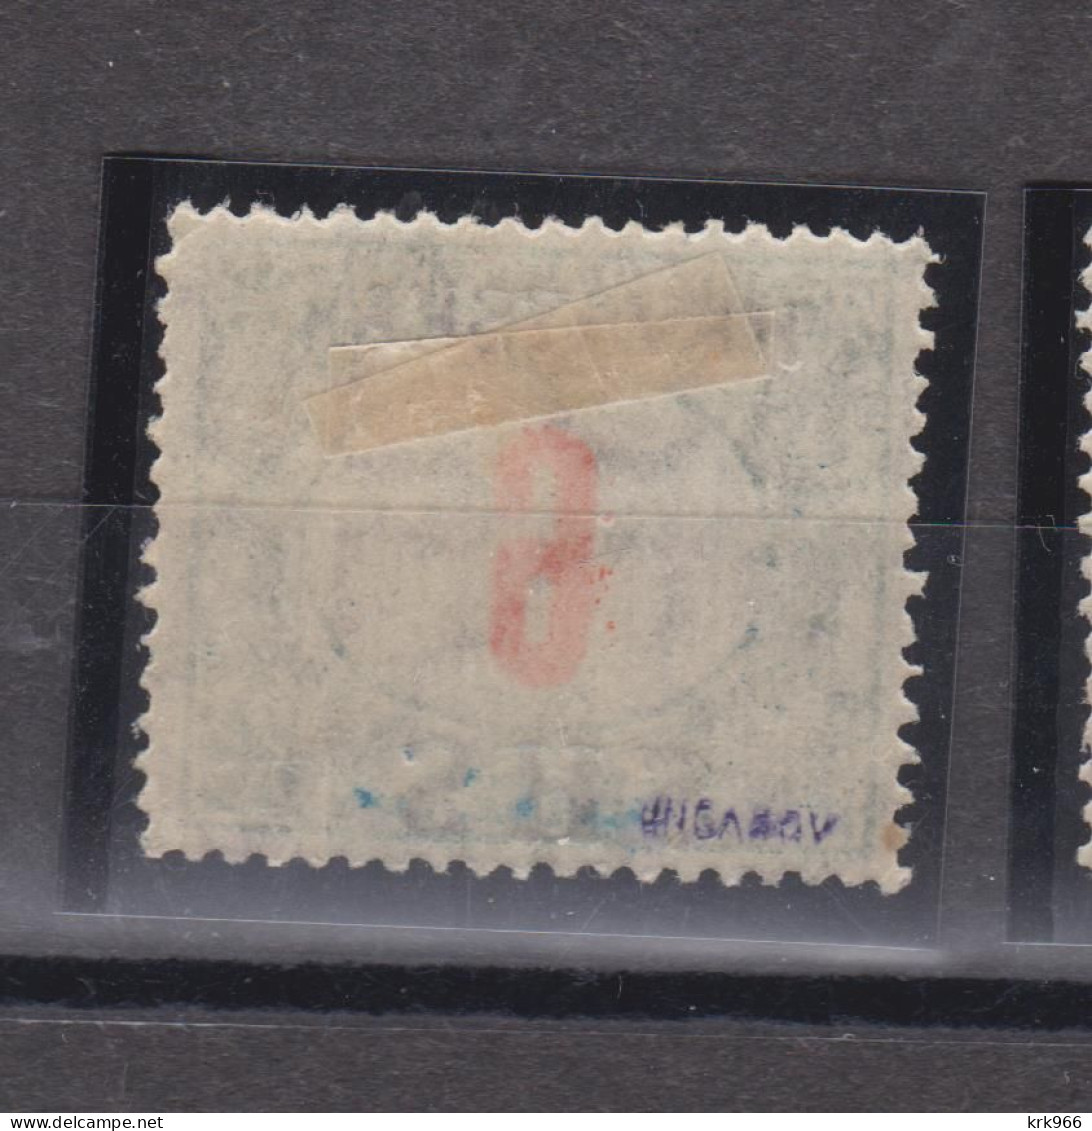 CROATIA  SHS 6 F Postage Due Not Issued  Hinged - Kroatien